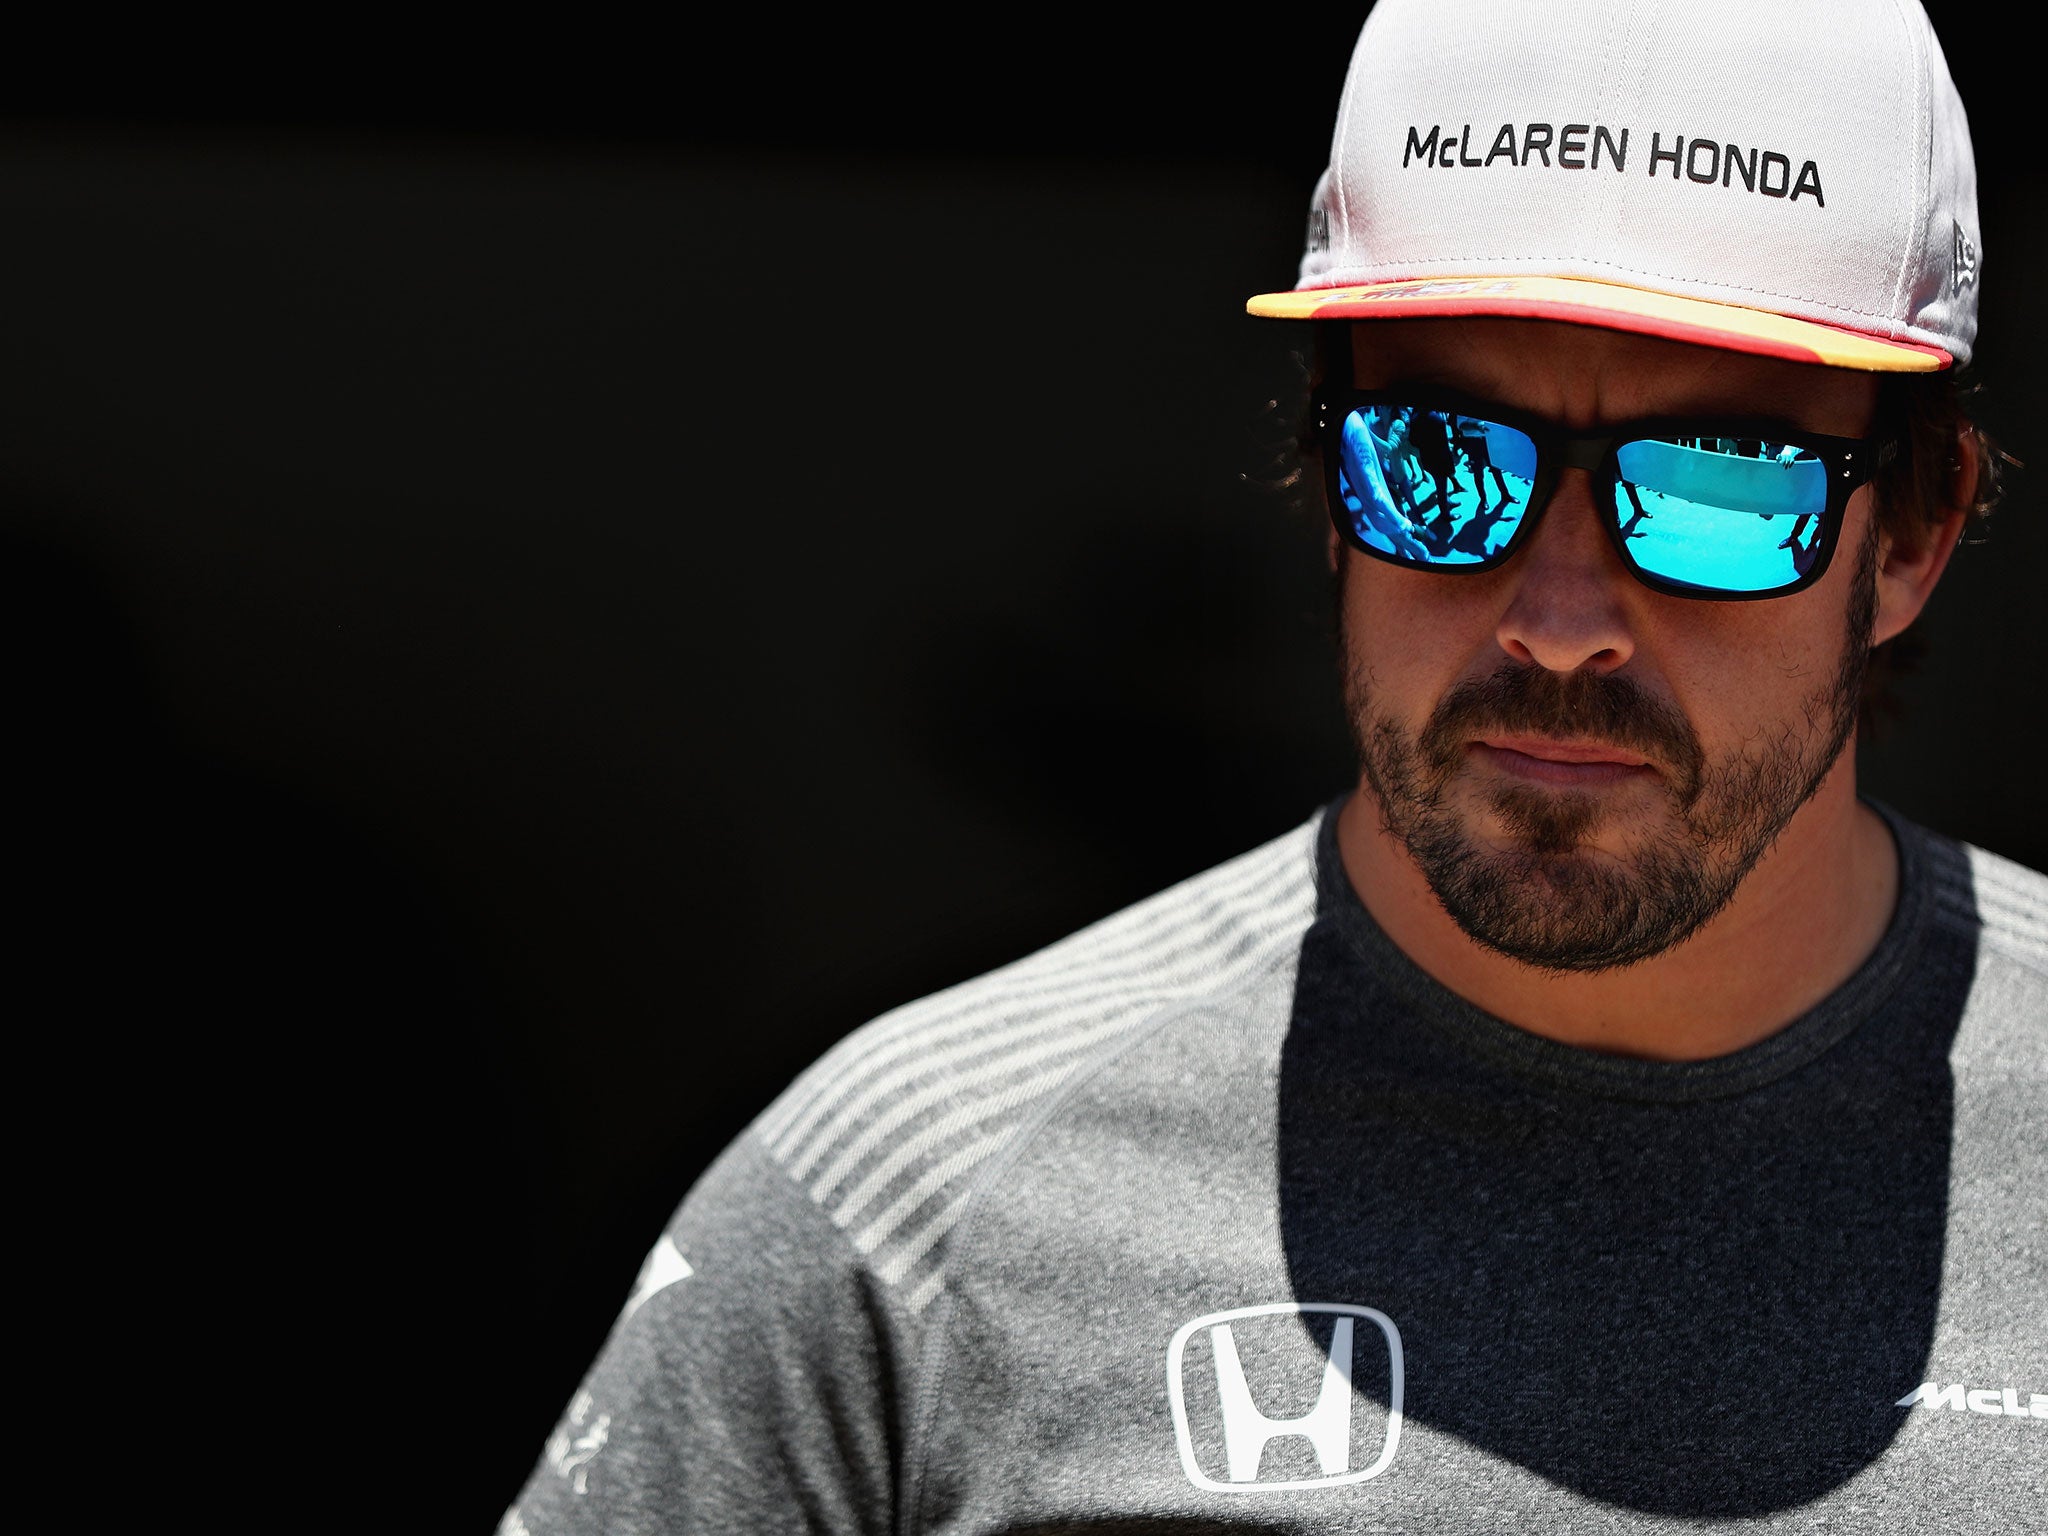 Fernando Alonso’s mercurial character and decision-making, allied with the odd spells of poor reliability, have undermined what should have been a stellar career.